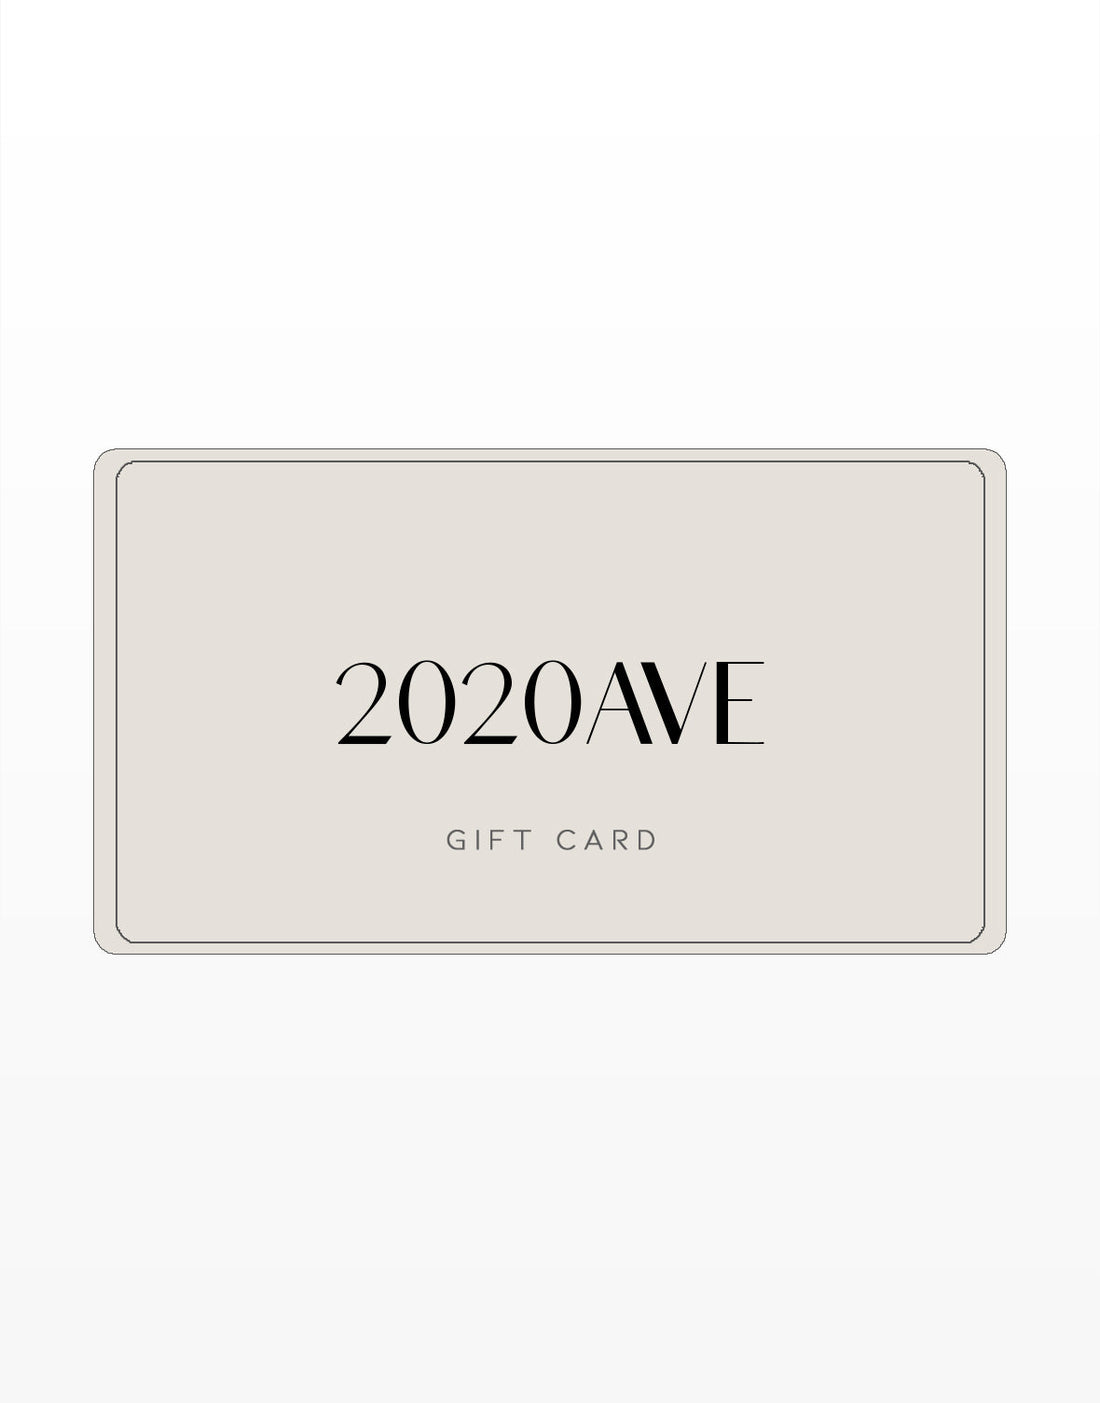 E-Gift Cards Gift Card -2020AVE